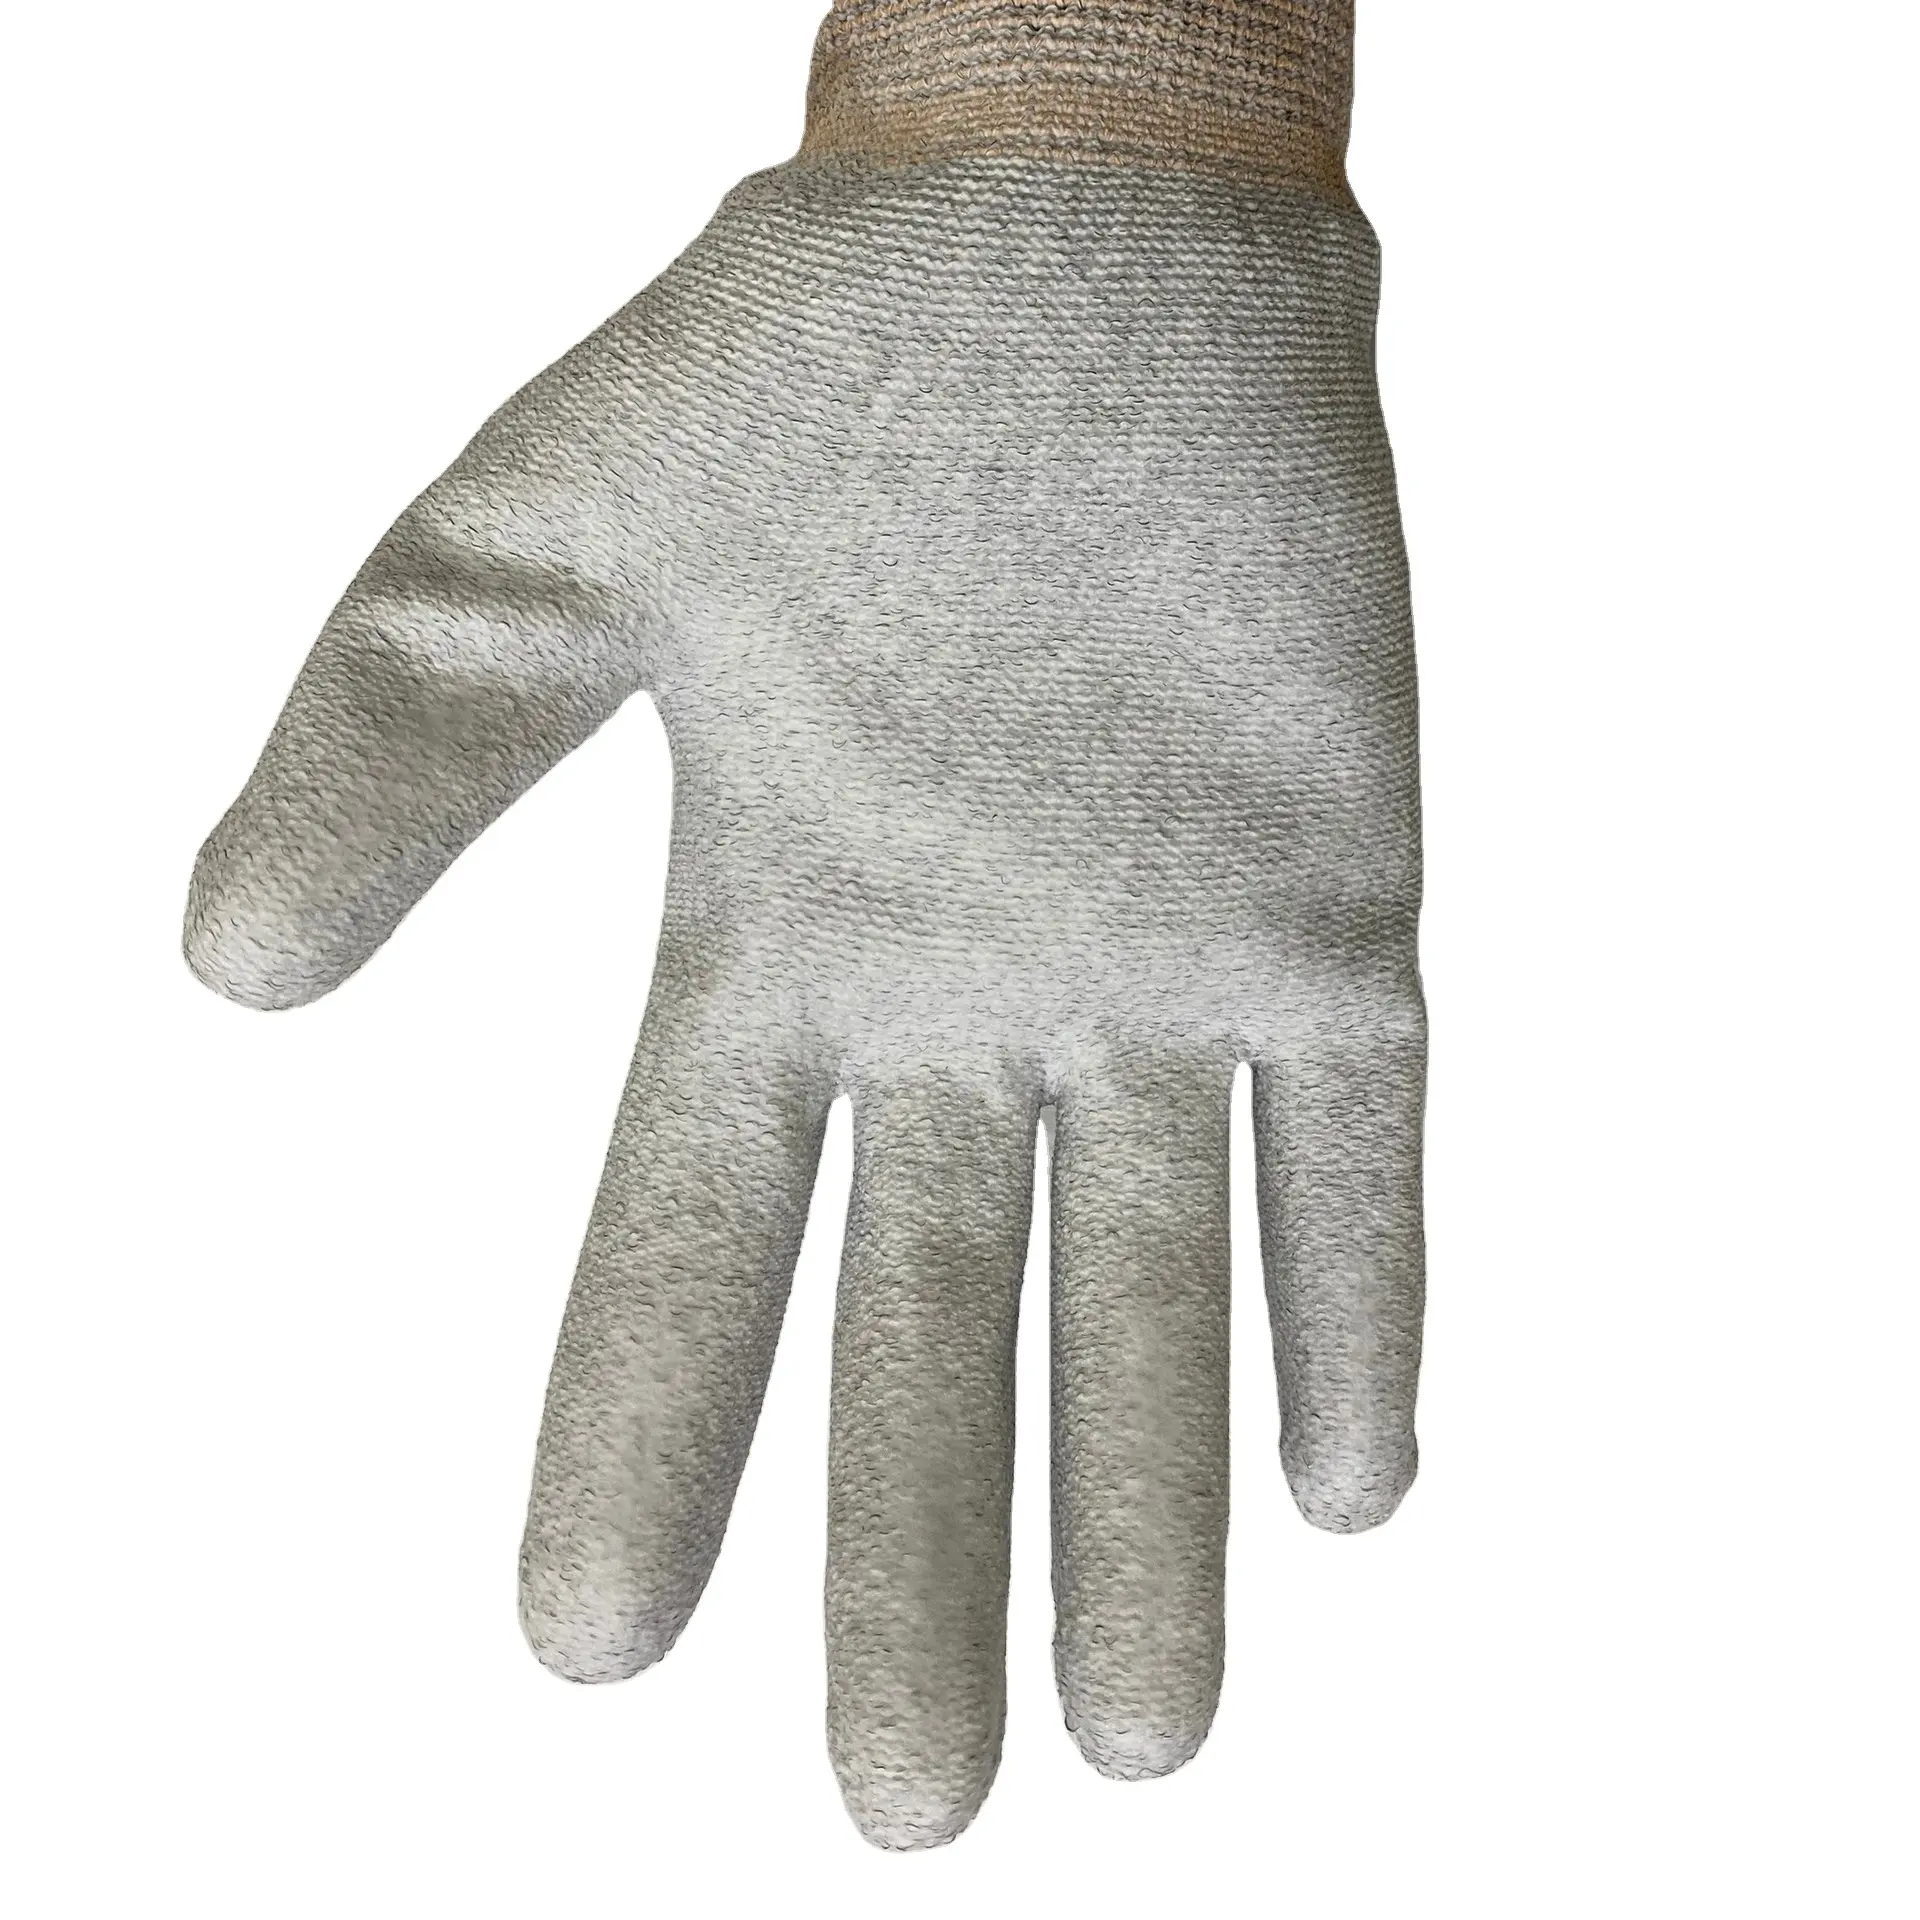 Hand Glove ESD Carbon fiber Antistatic Work Safety Clean Room Gloves antistatic with PU palm coated PU coated gloves